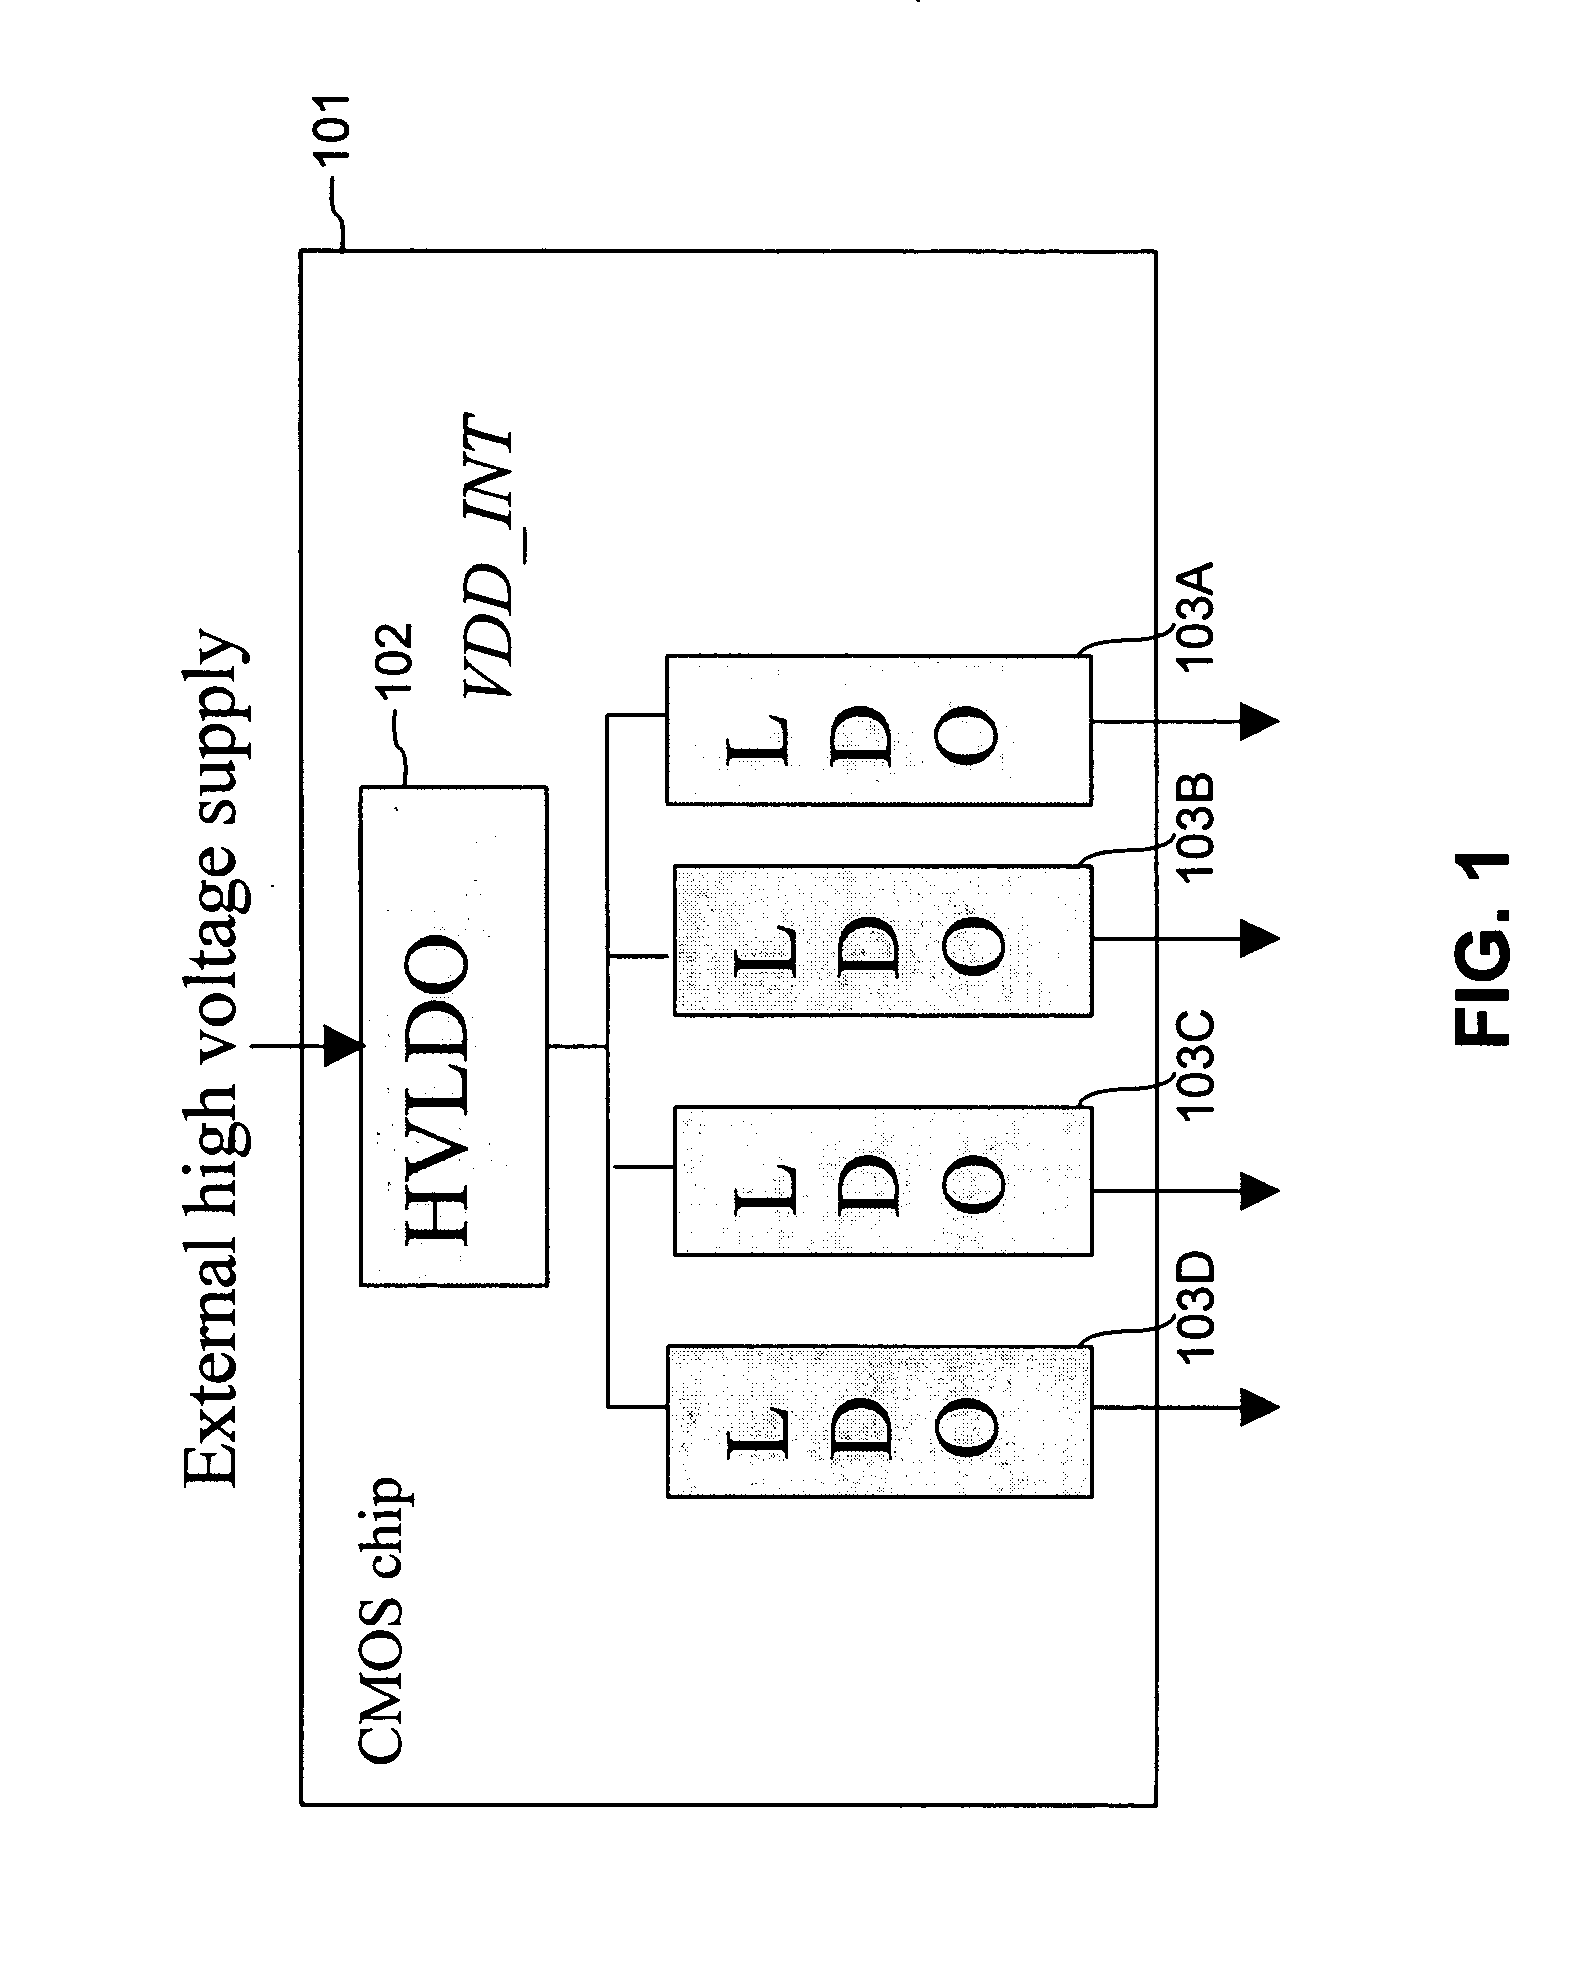 Power management unit for use in portable applications